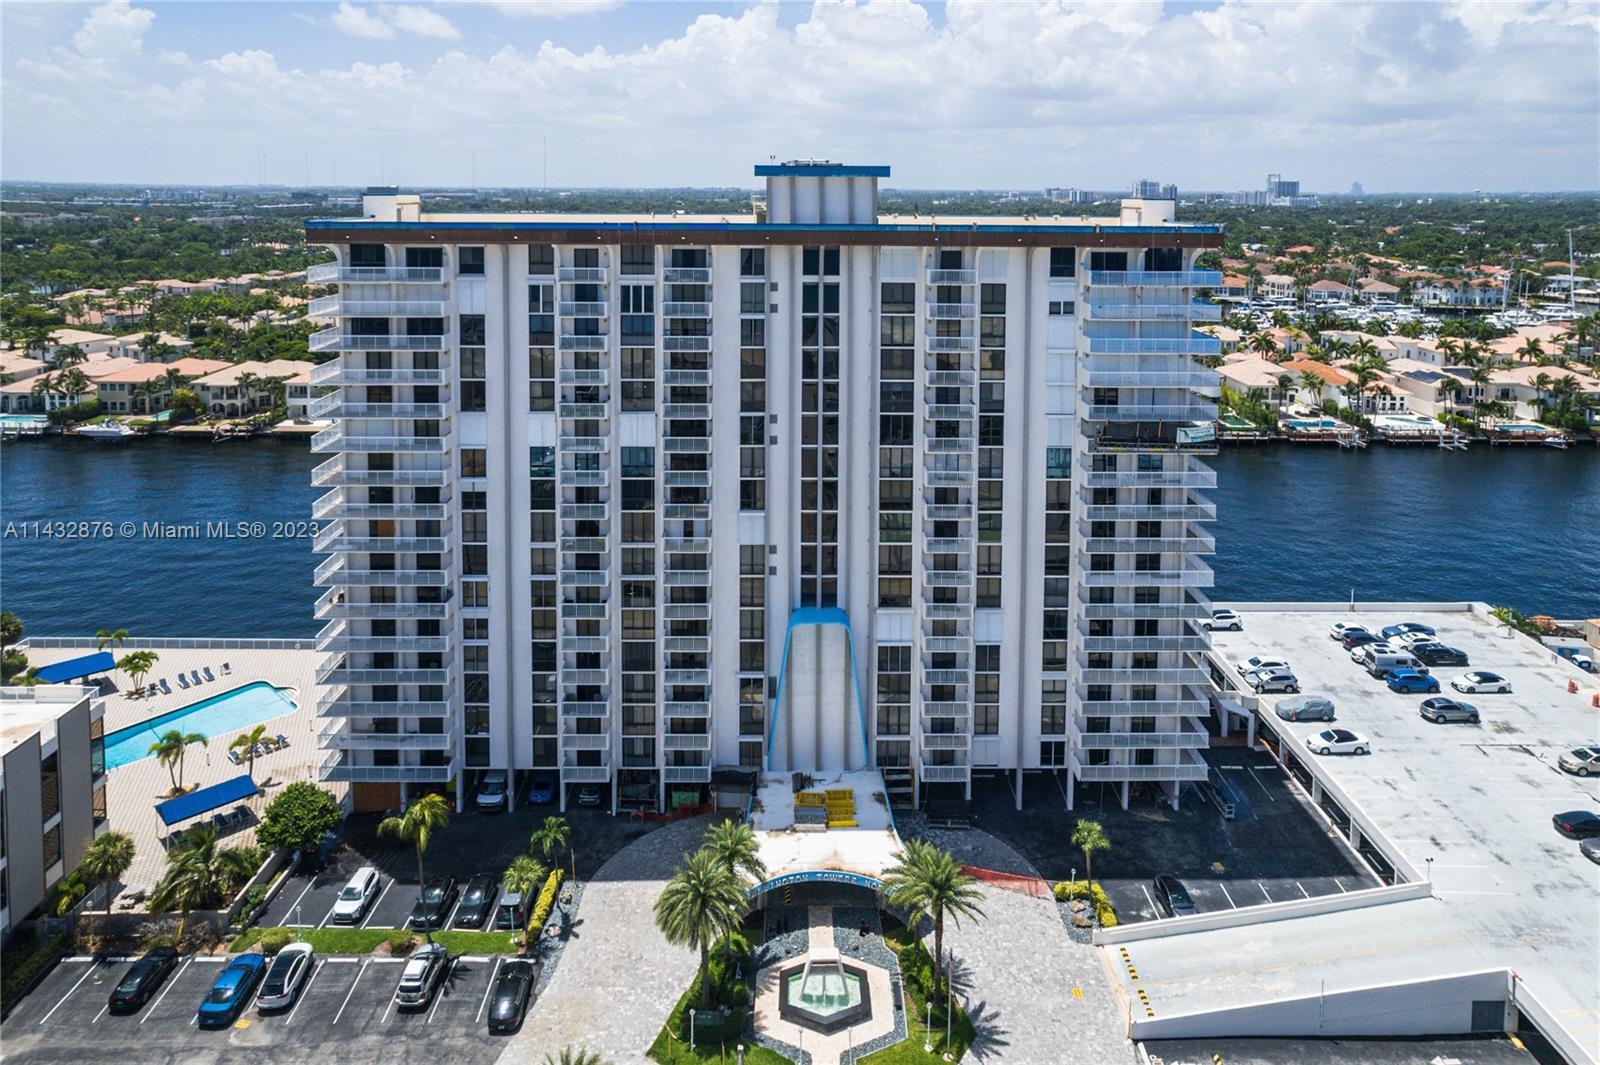 Photo of 1500 S Ocean Dr #9G in Hollywood, FL